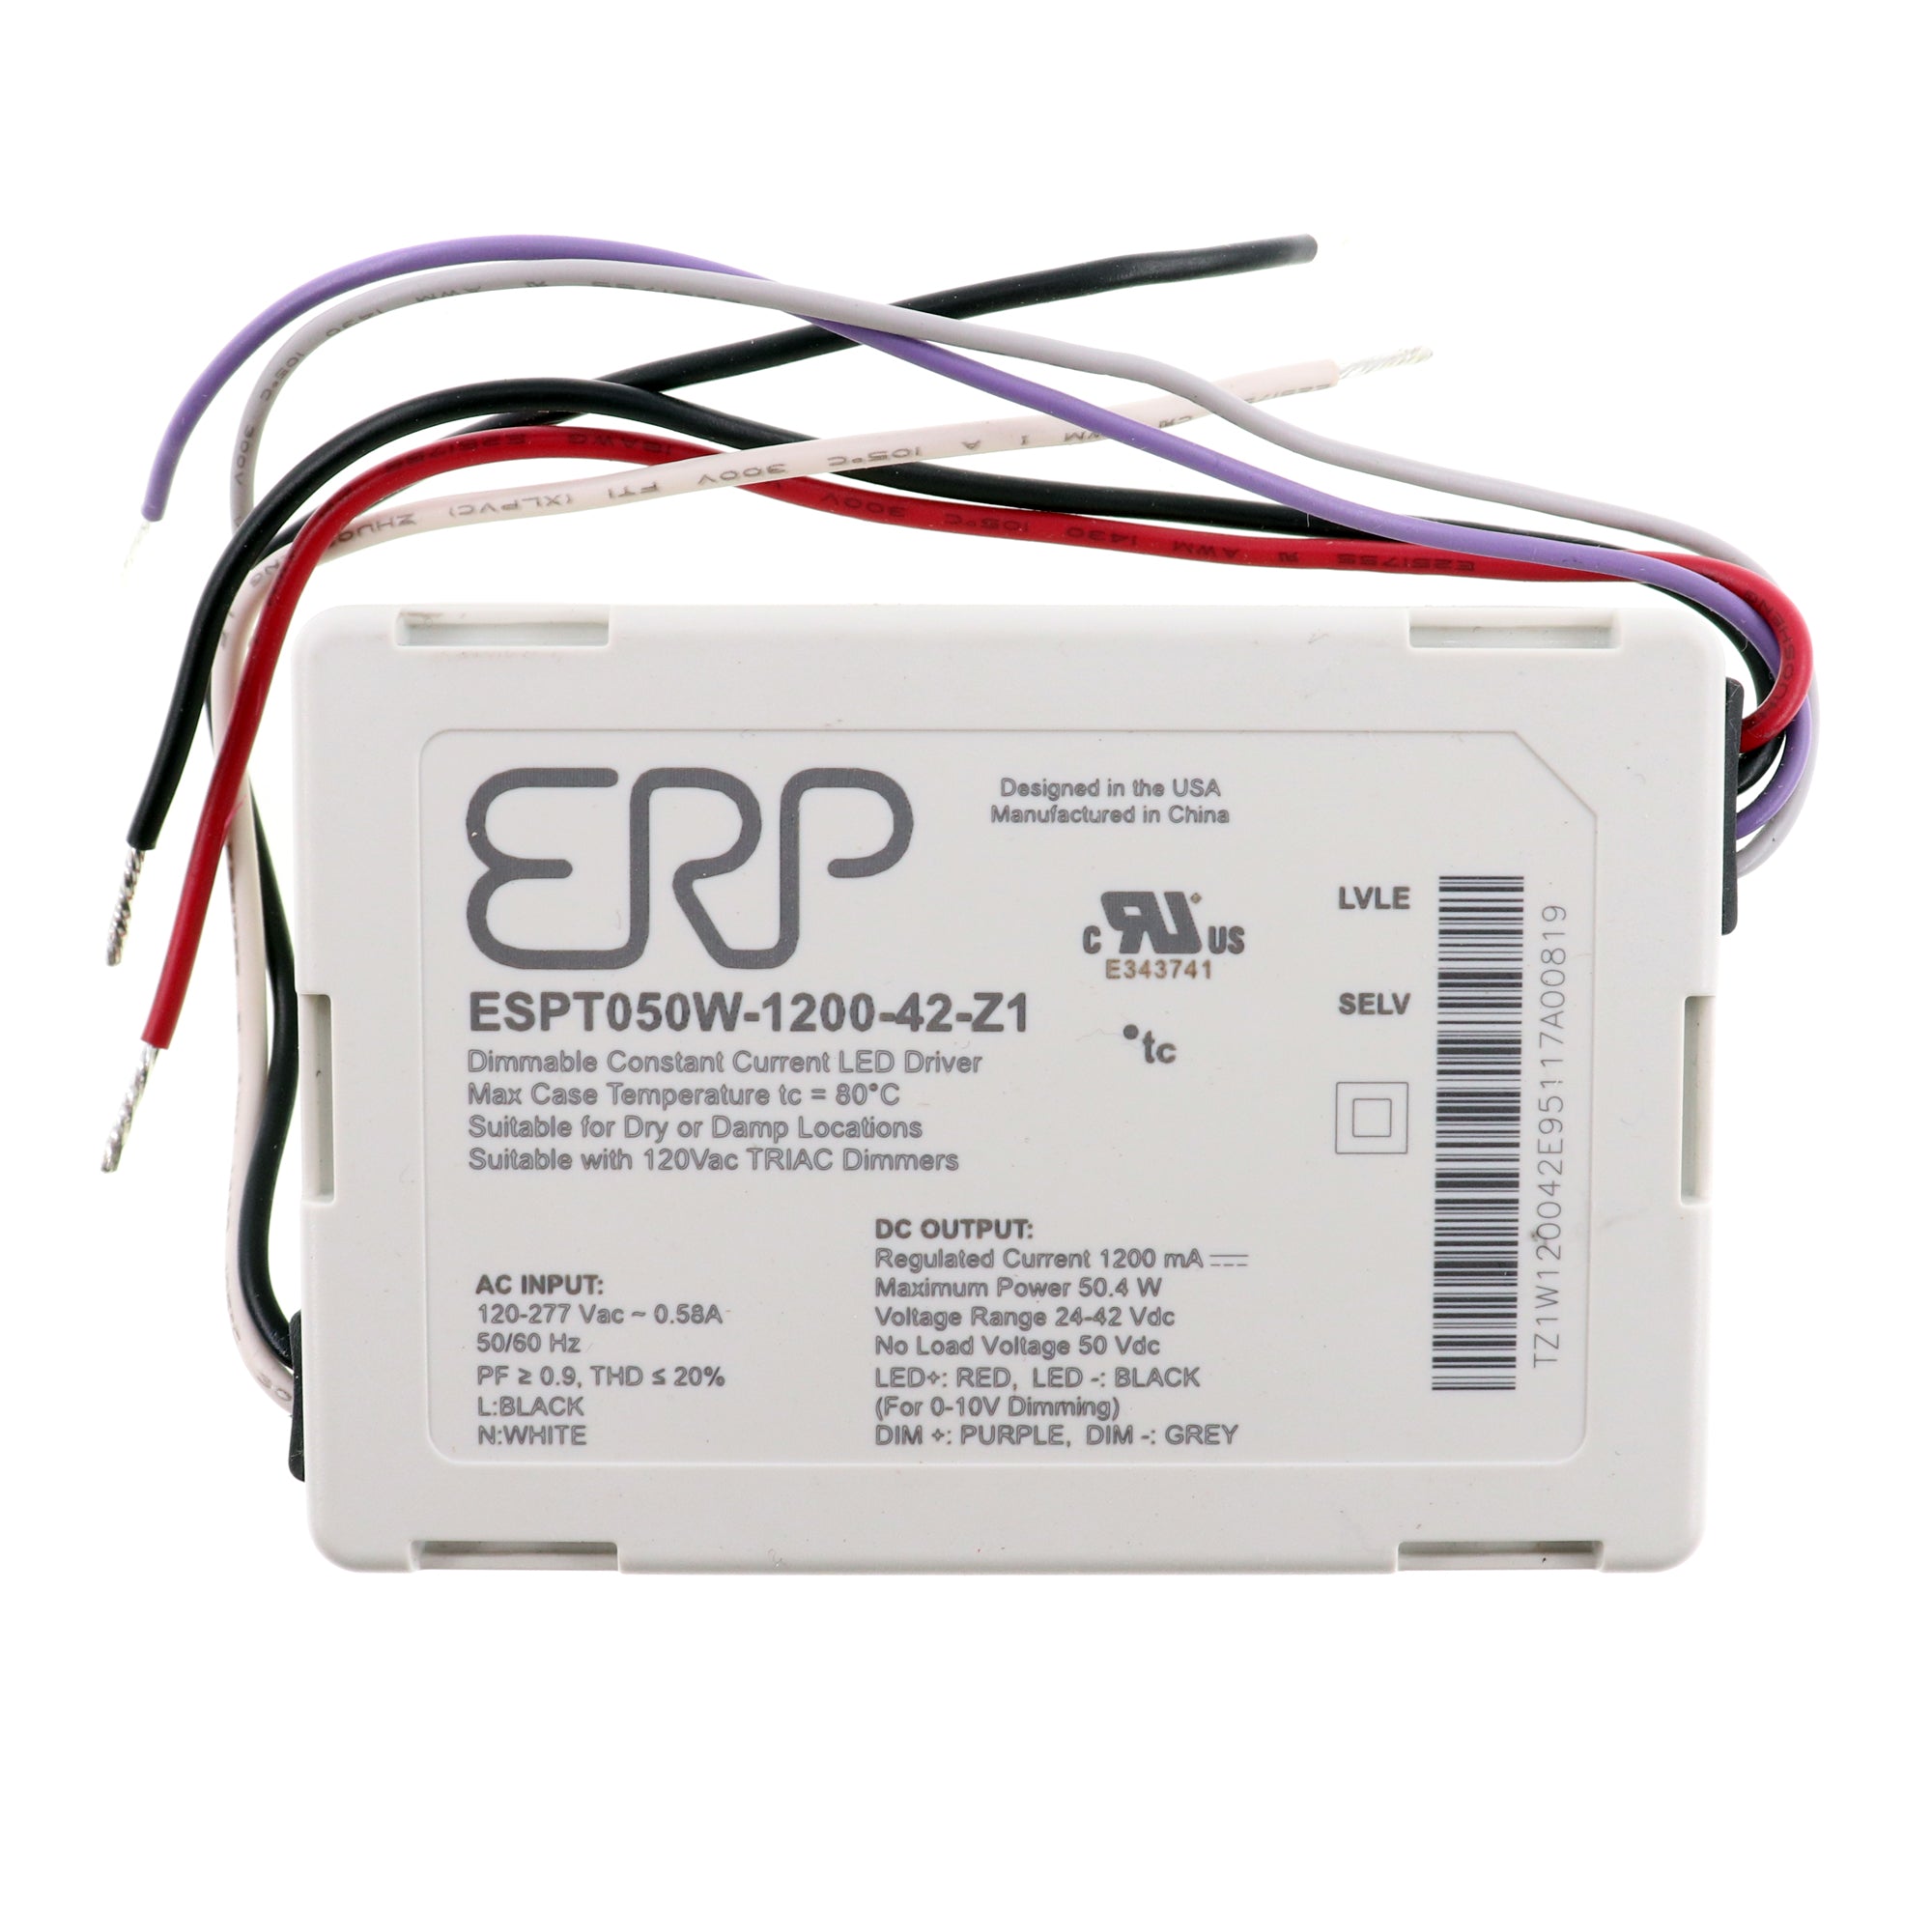 ERP, ERP ESTP050W-1200-42-Z1 DIMMABLE CONSTANT CURRENT LED DRIVER, 1200MA 50W, 24-42V